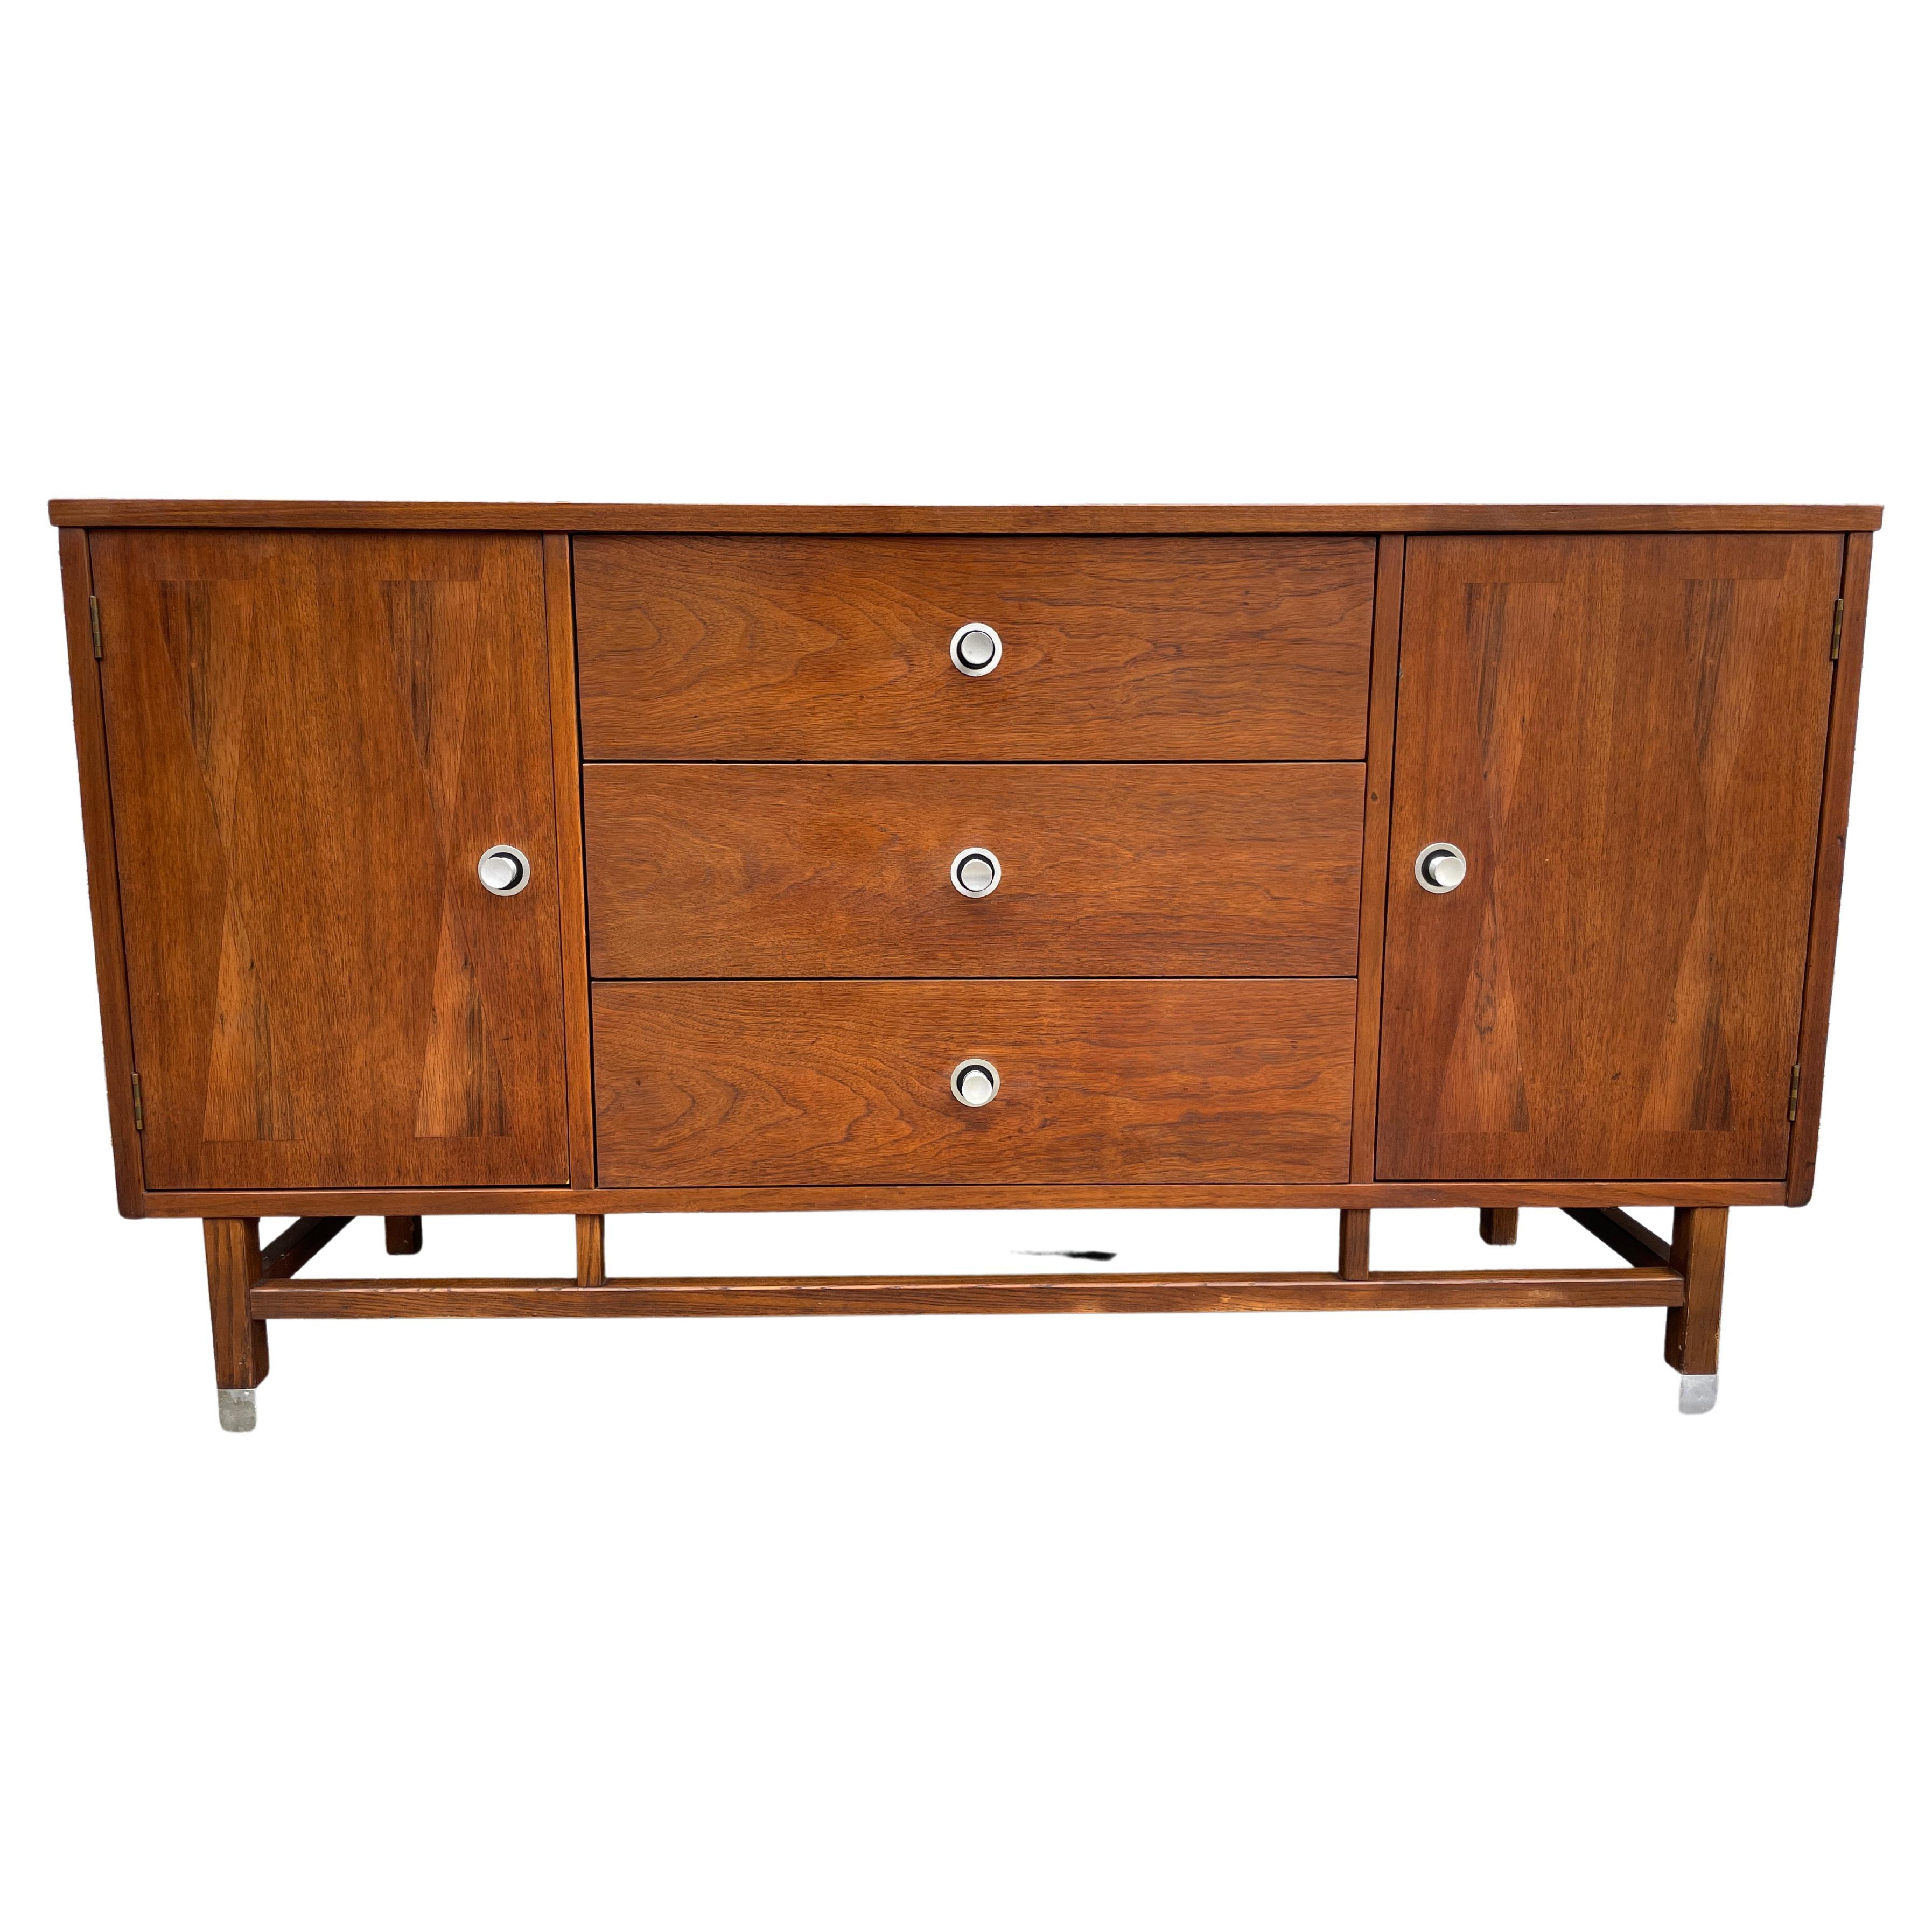 Mid-Century Modern Walnut Credenza with Aluminum Pulls by Stanley